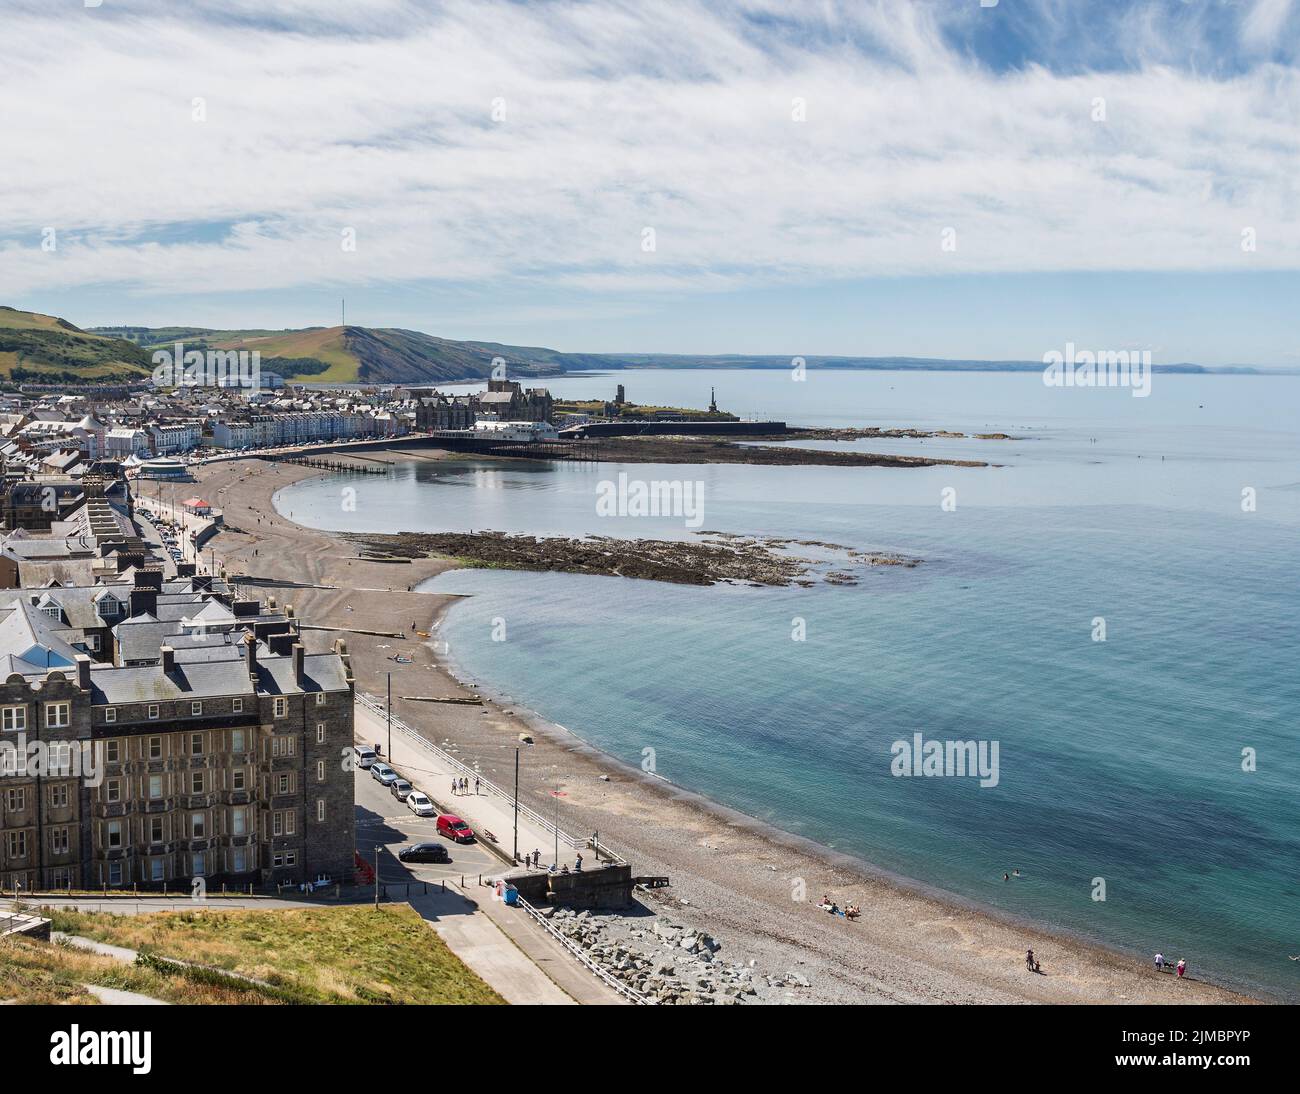 A view overlooking the town and beach at Cardigan Bay Aberystwyth, Wales, United Kingdom. Stock Photo